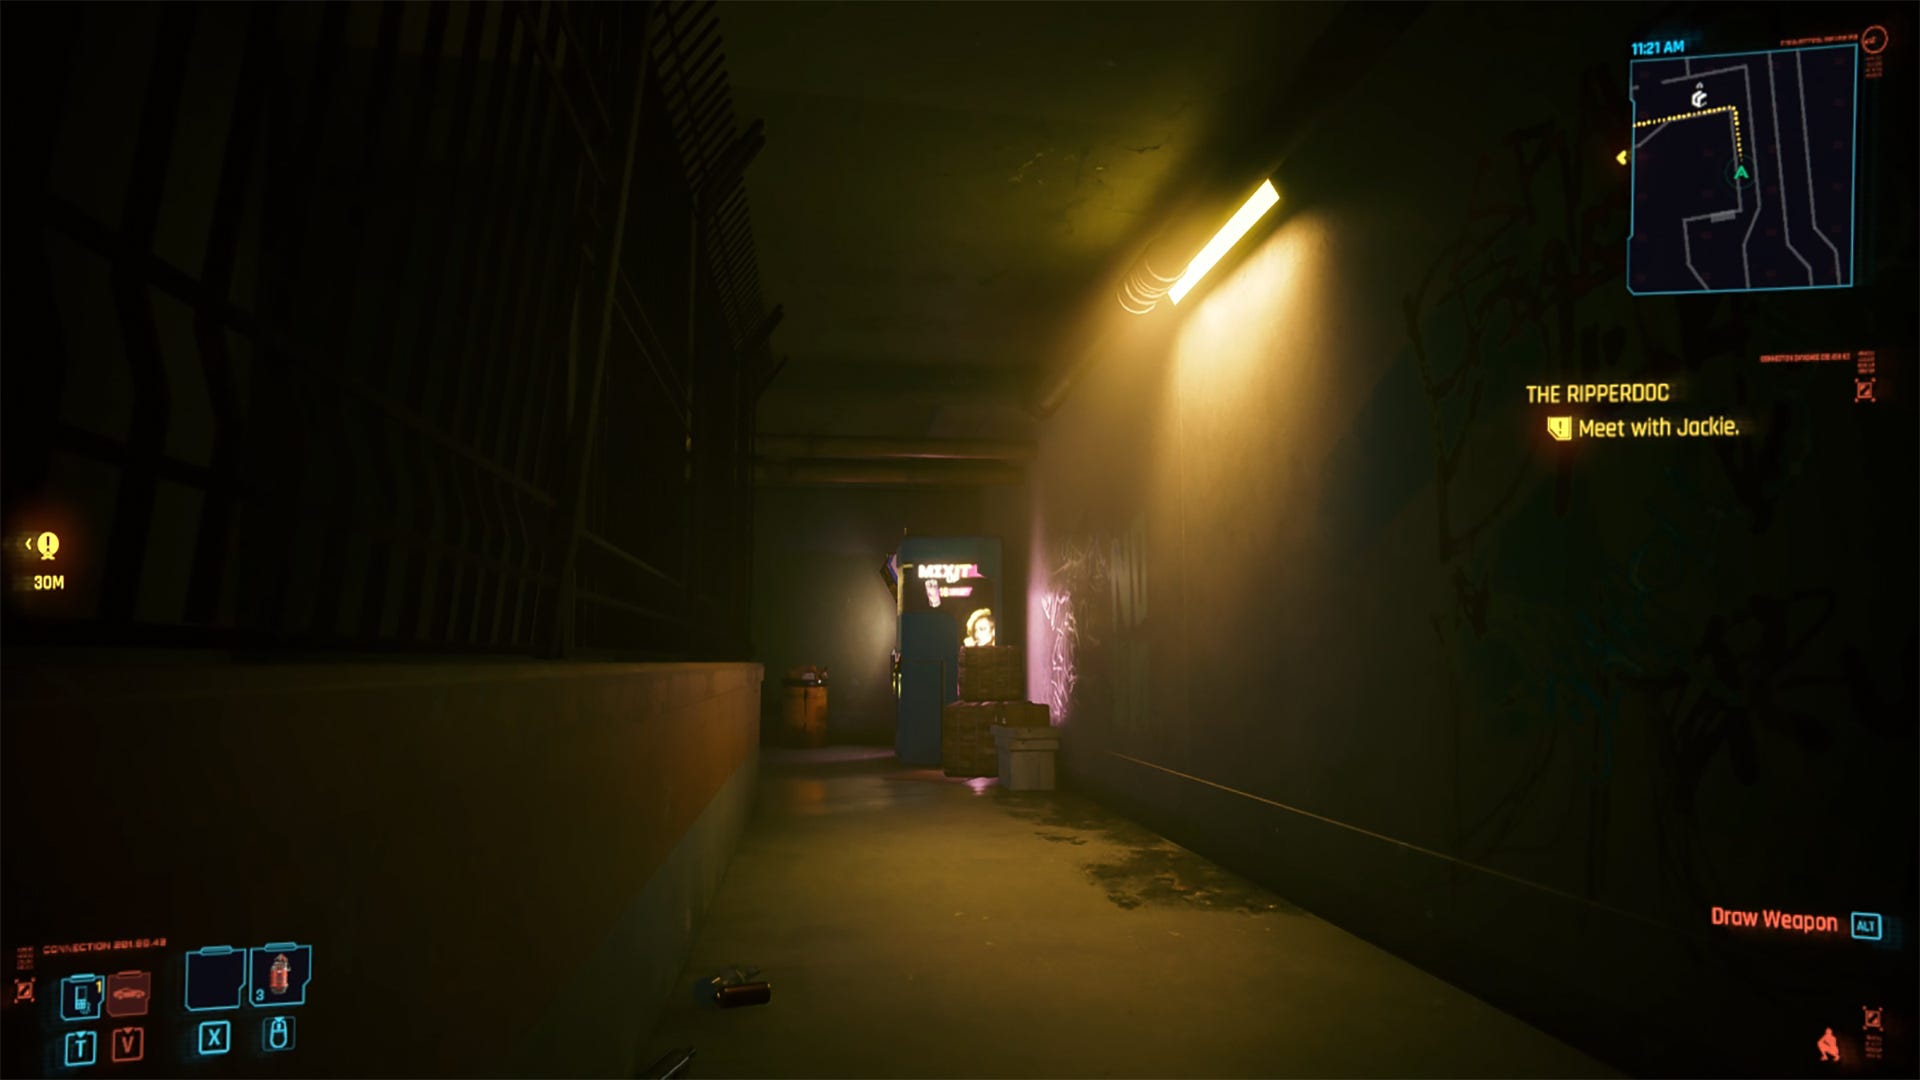 an image of a virtual apartment complex hallway and vending machine in "Cyberpunk 2077."